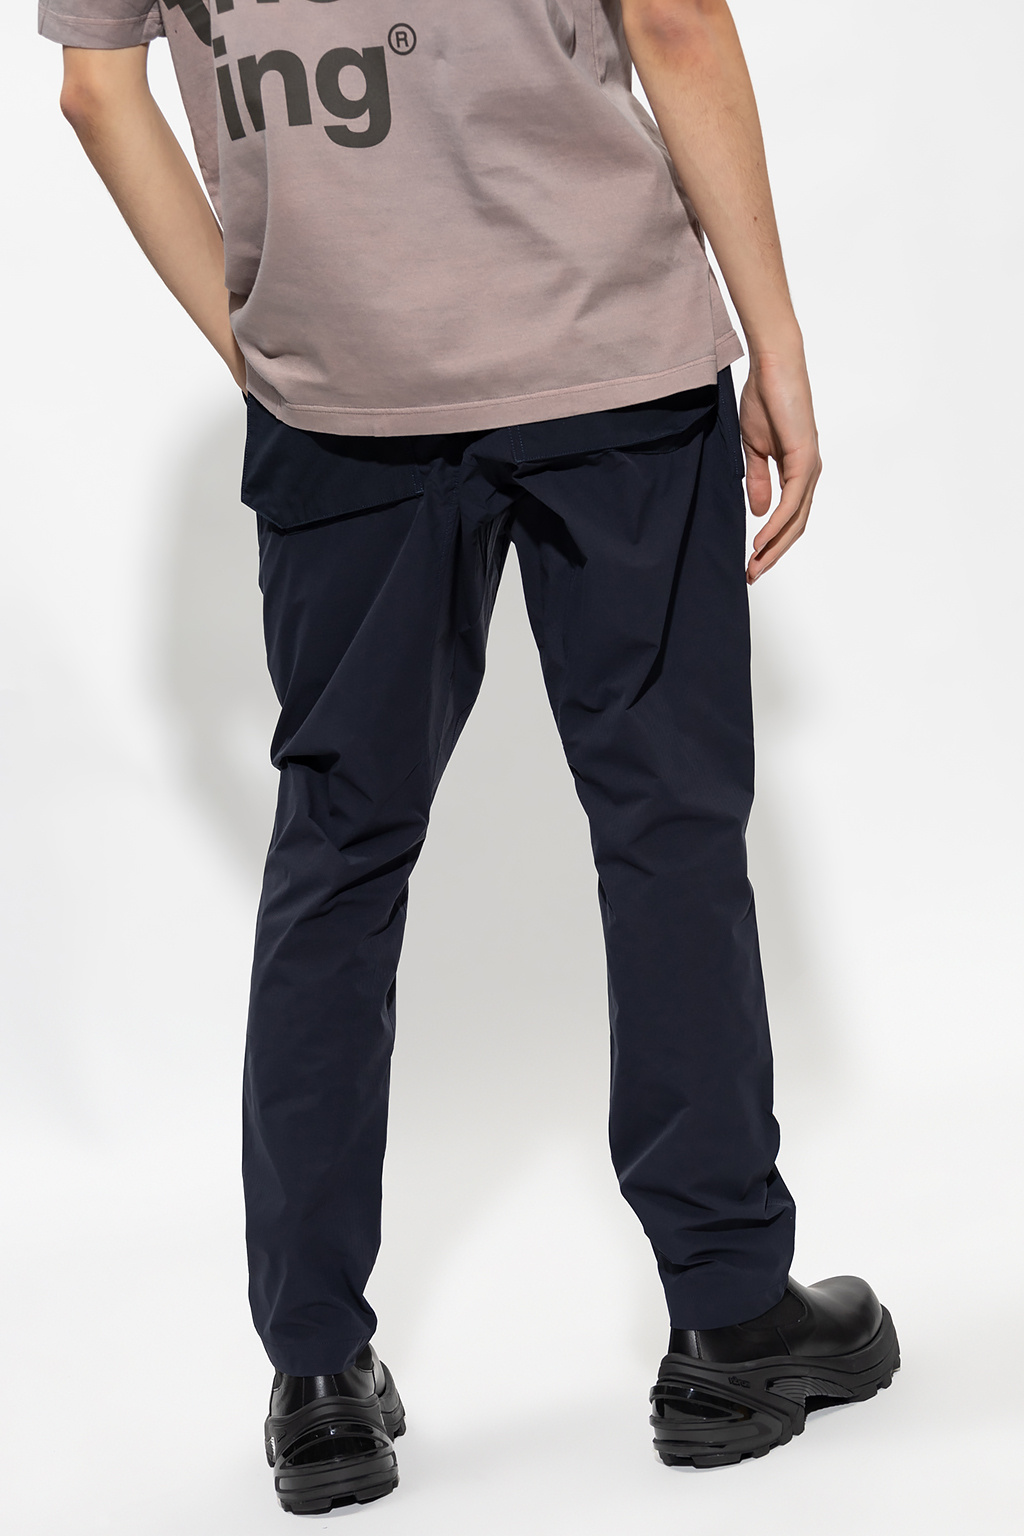 White Mountaineering Trousers with multiple pockets